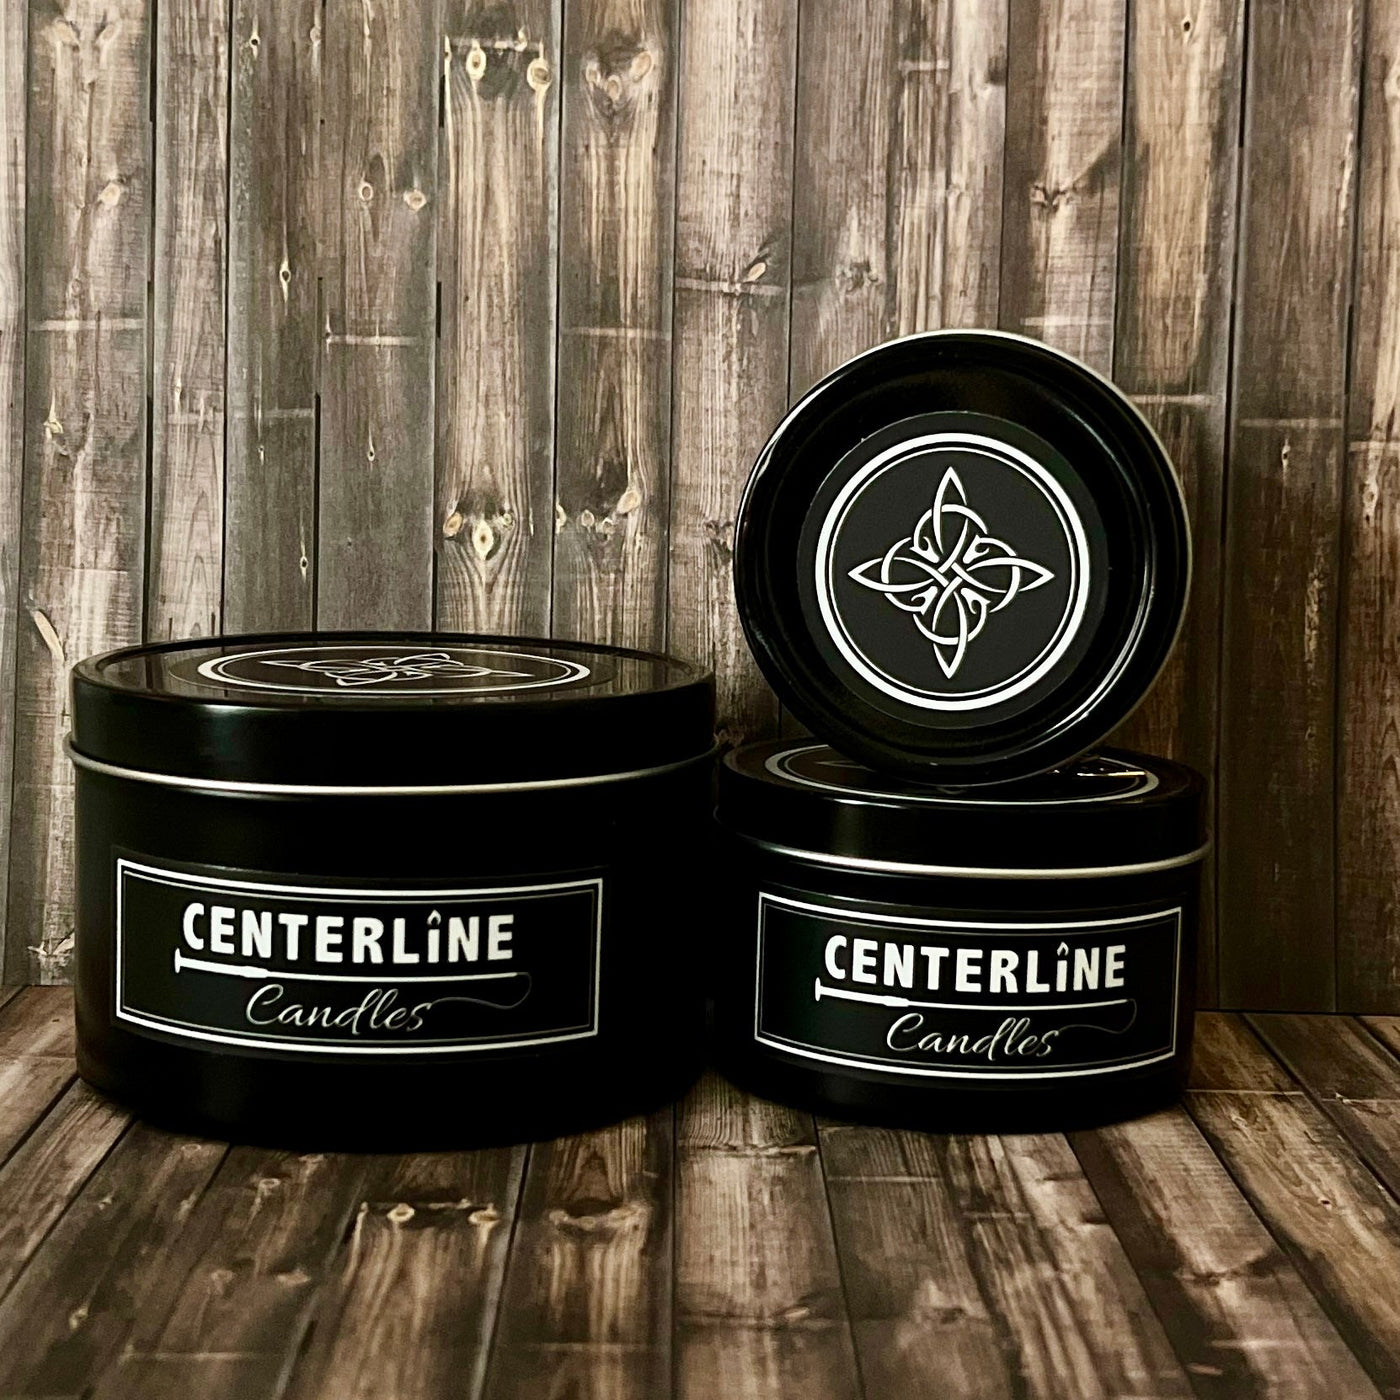 Christmas Carol by Centerline Candles